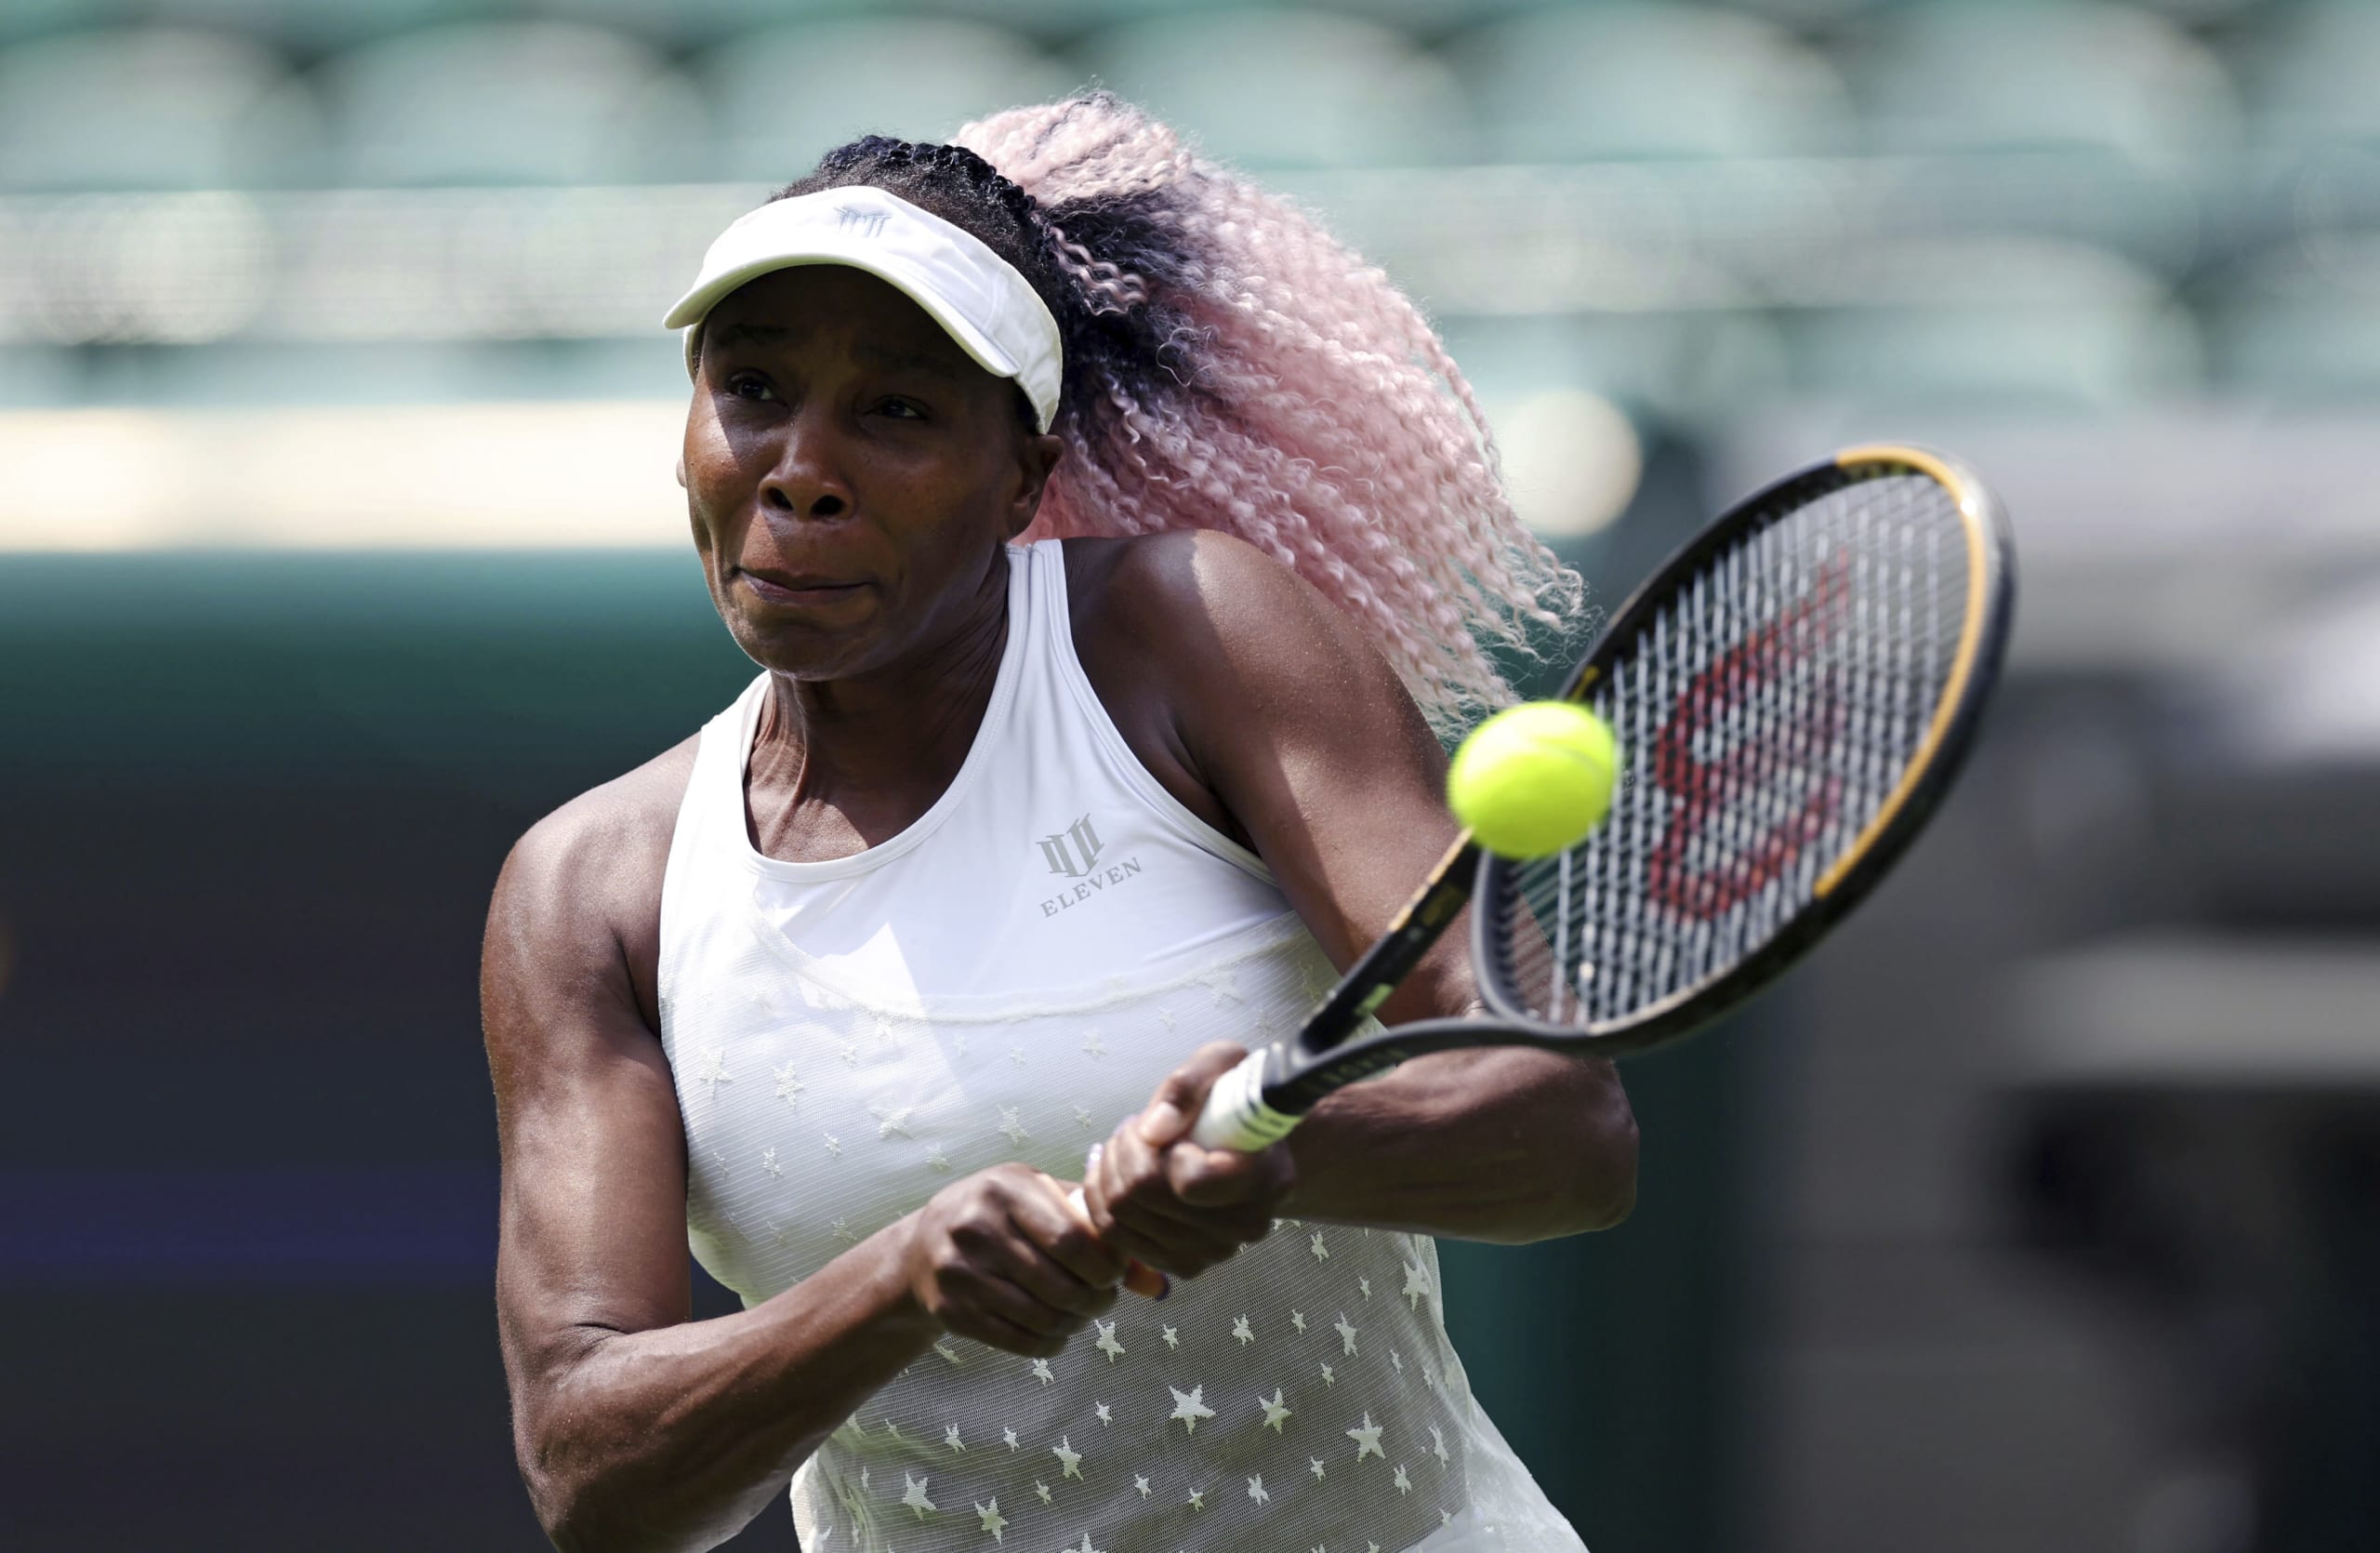 Venus Williams is back at Wimbledon at age 43 and ready to play on Centre Court again